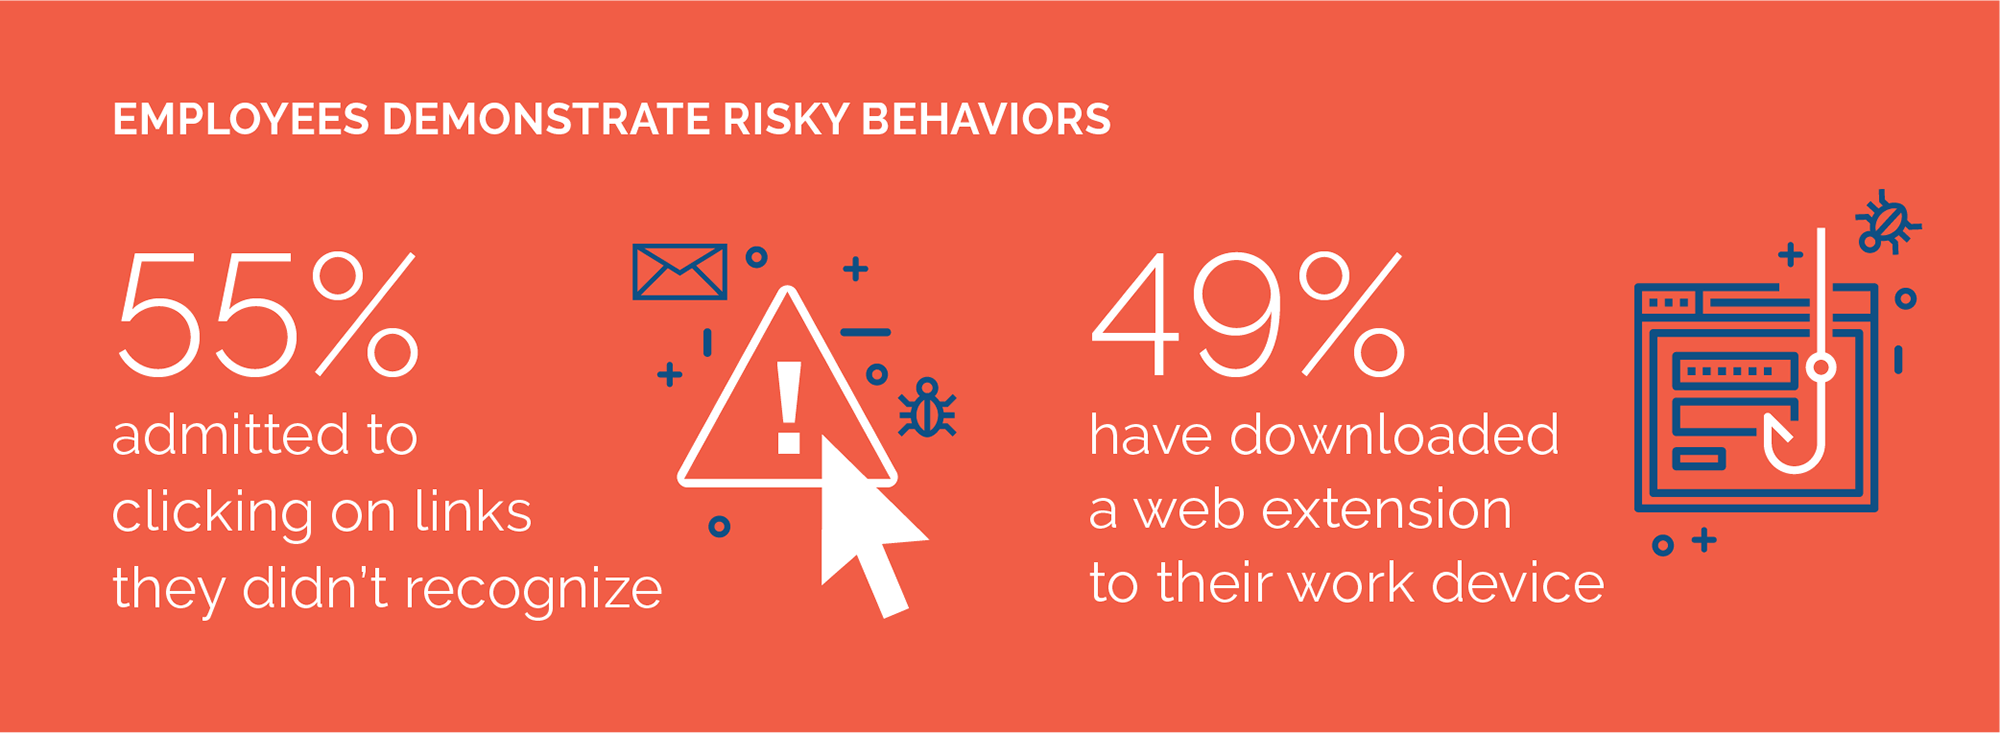 A data graphic showing that employees demonstrate risky behavior by clicking links they dont recognize and downloading web extensions to their work devices.